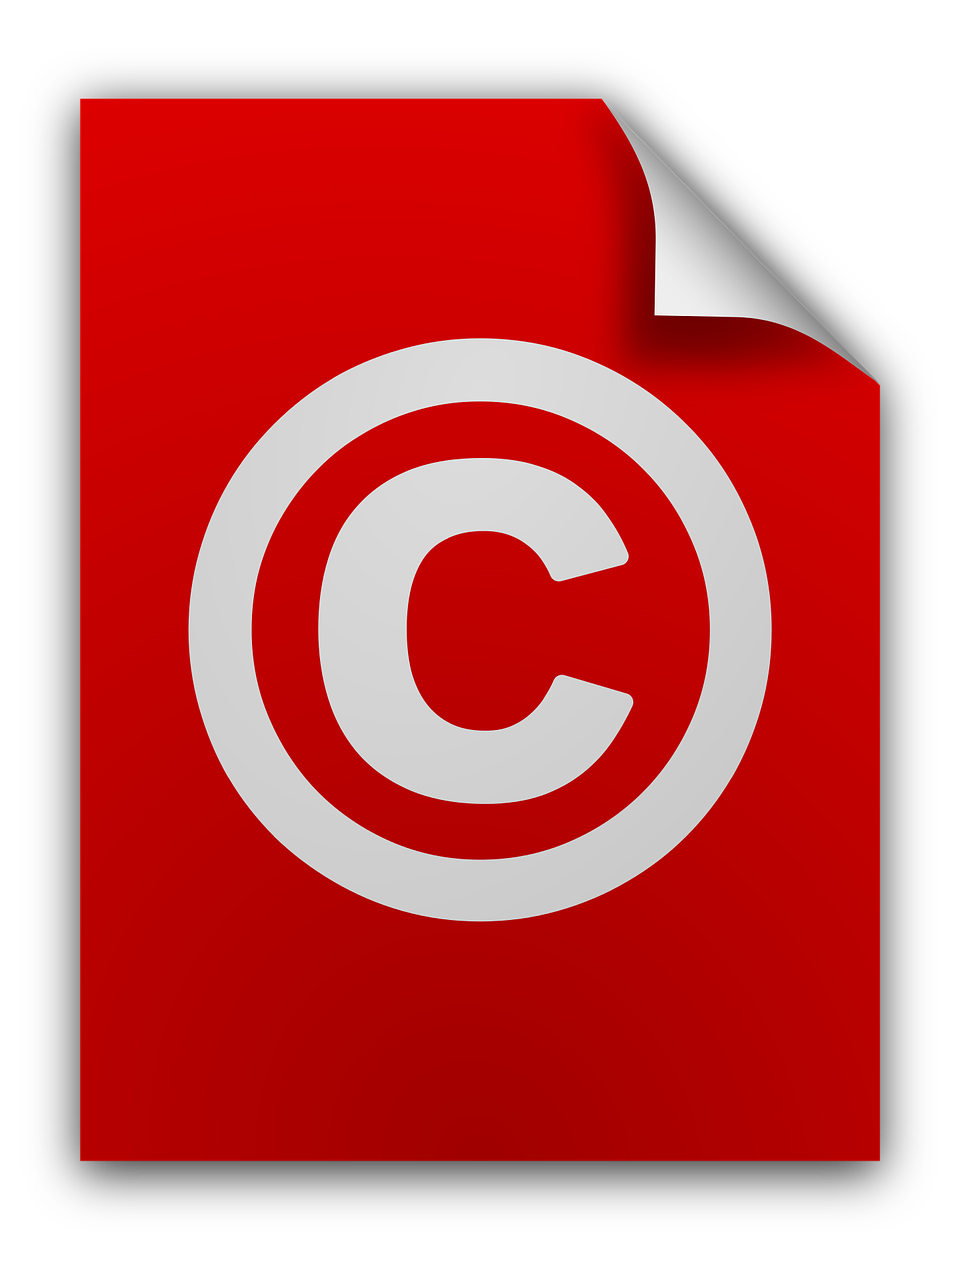 copying copyright icons free photo